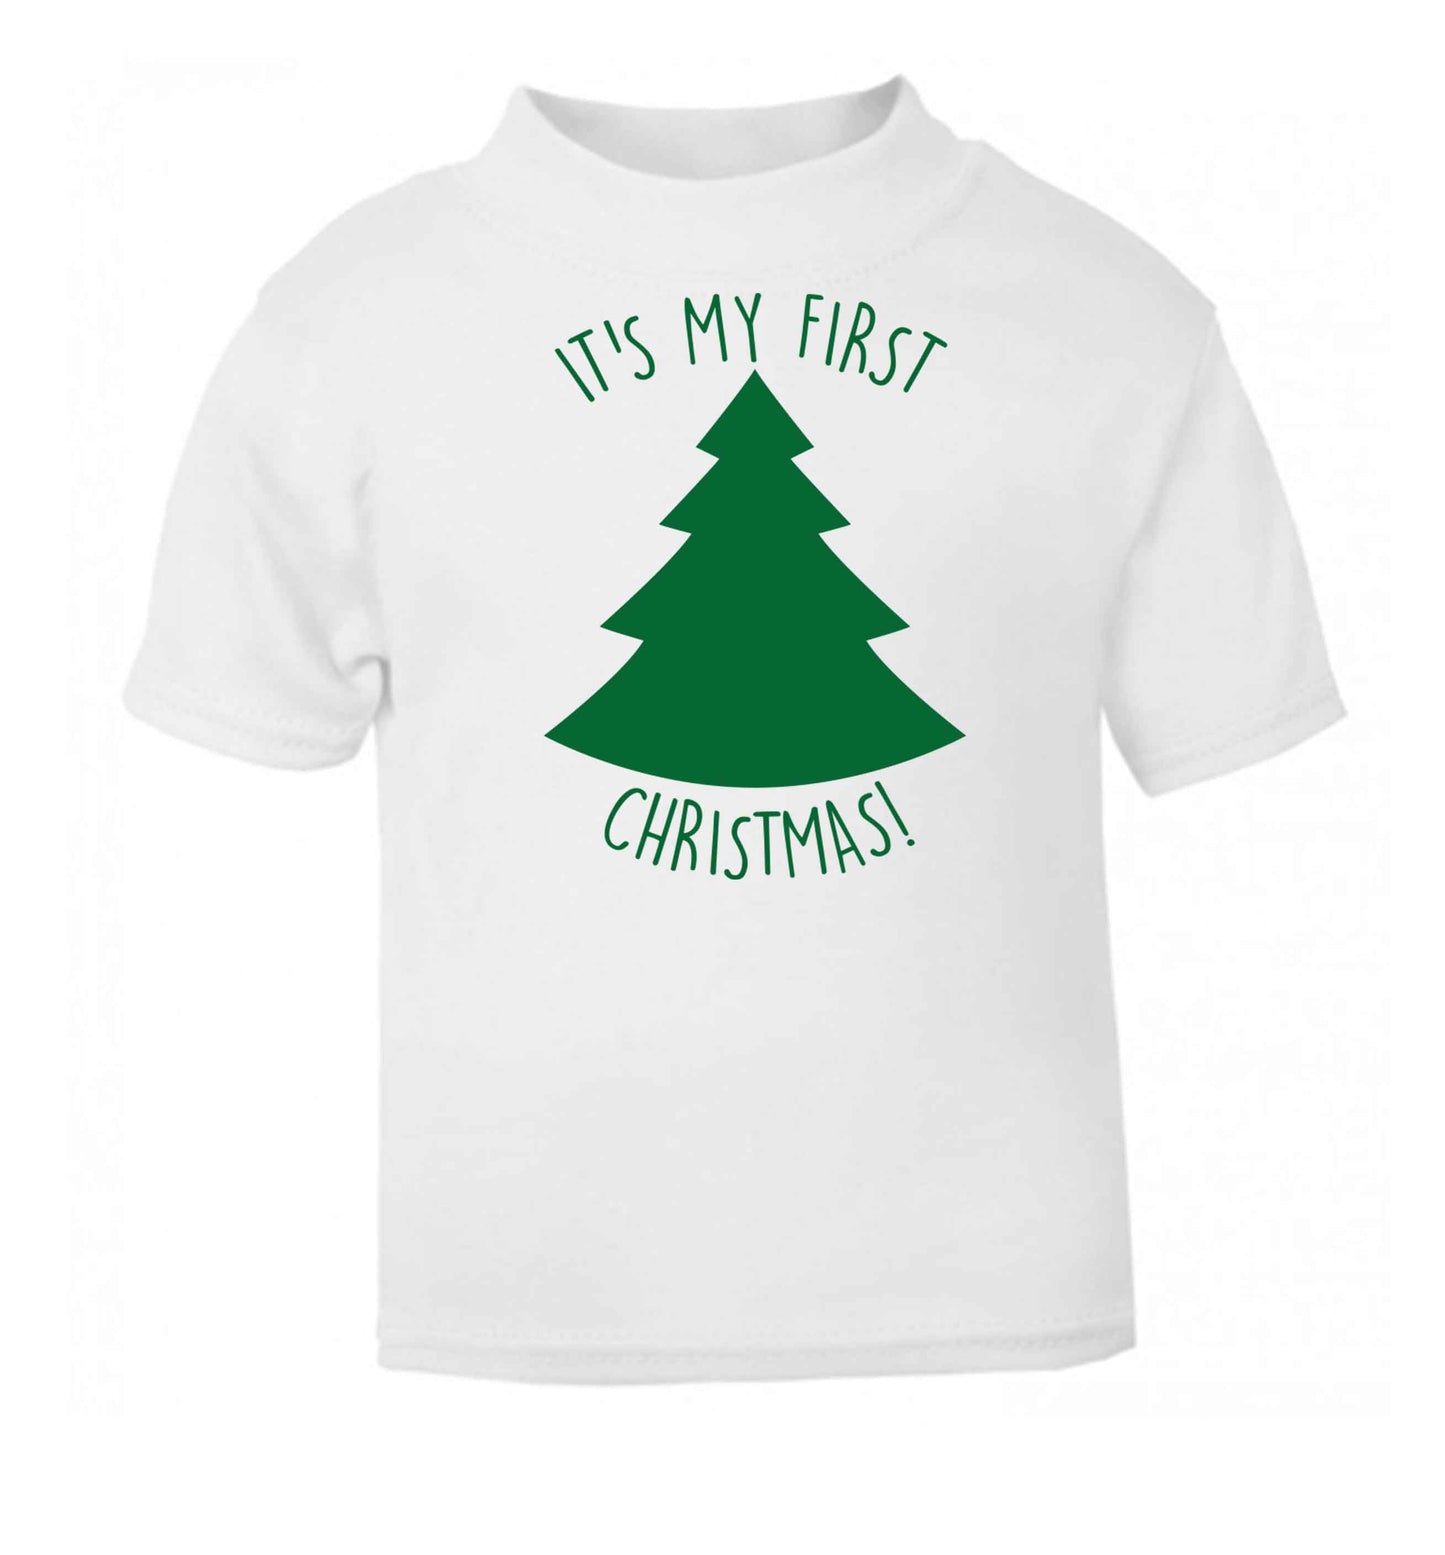 It's my first Christmas - tree white baby toddler Tshirt 2 Years